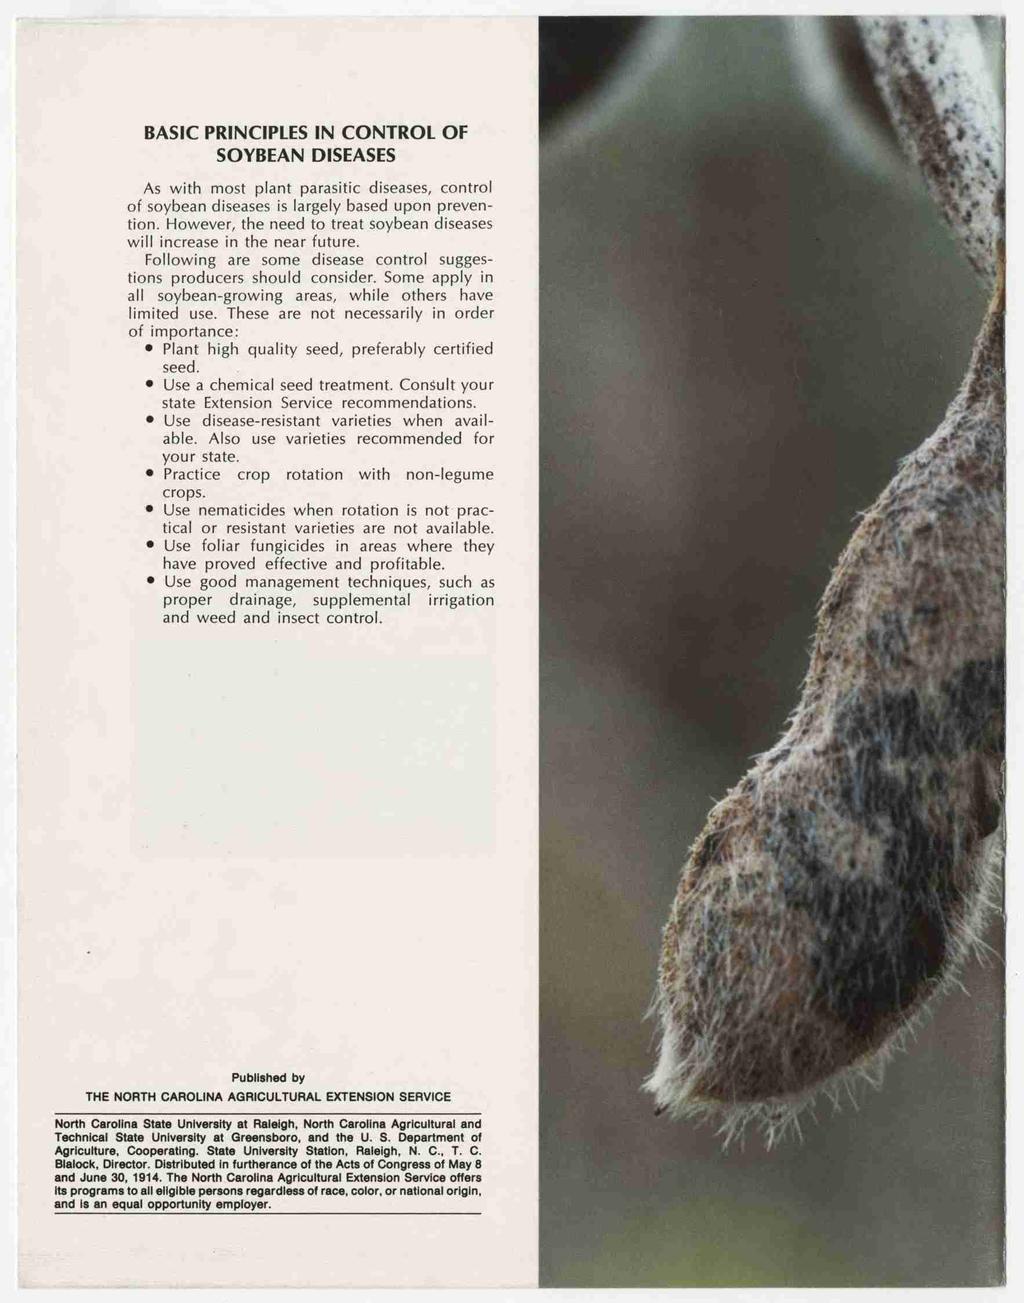 BASIC PRINCIPLES IN CONTROL OF SOYBEAN DISEASES As with most plant parasitic diseases, control of soybean diseases is largely based upon prevention.